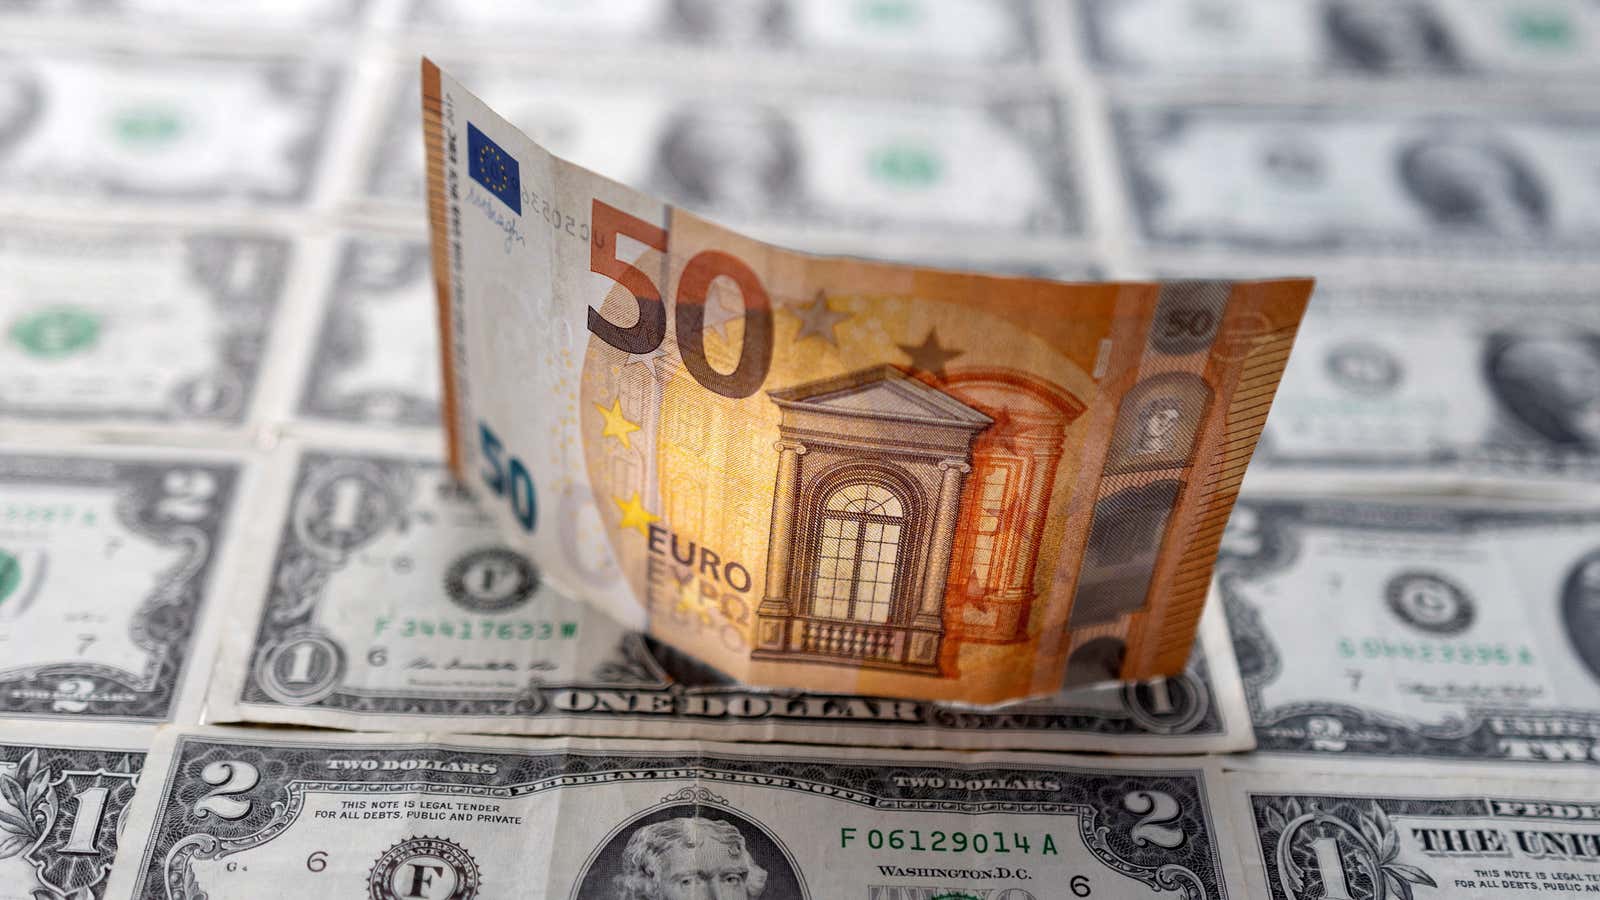 The euro has slid to parity with the dollar.